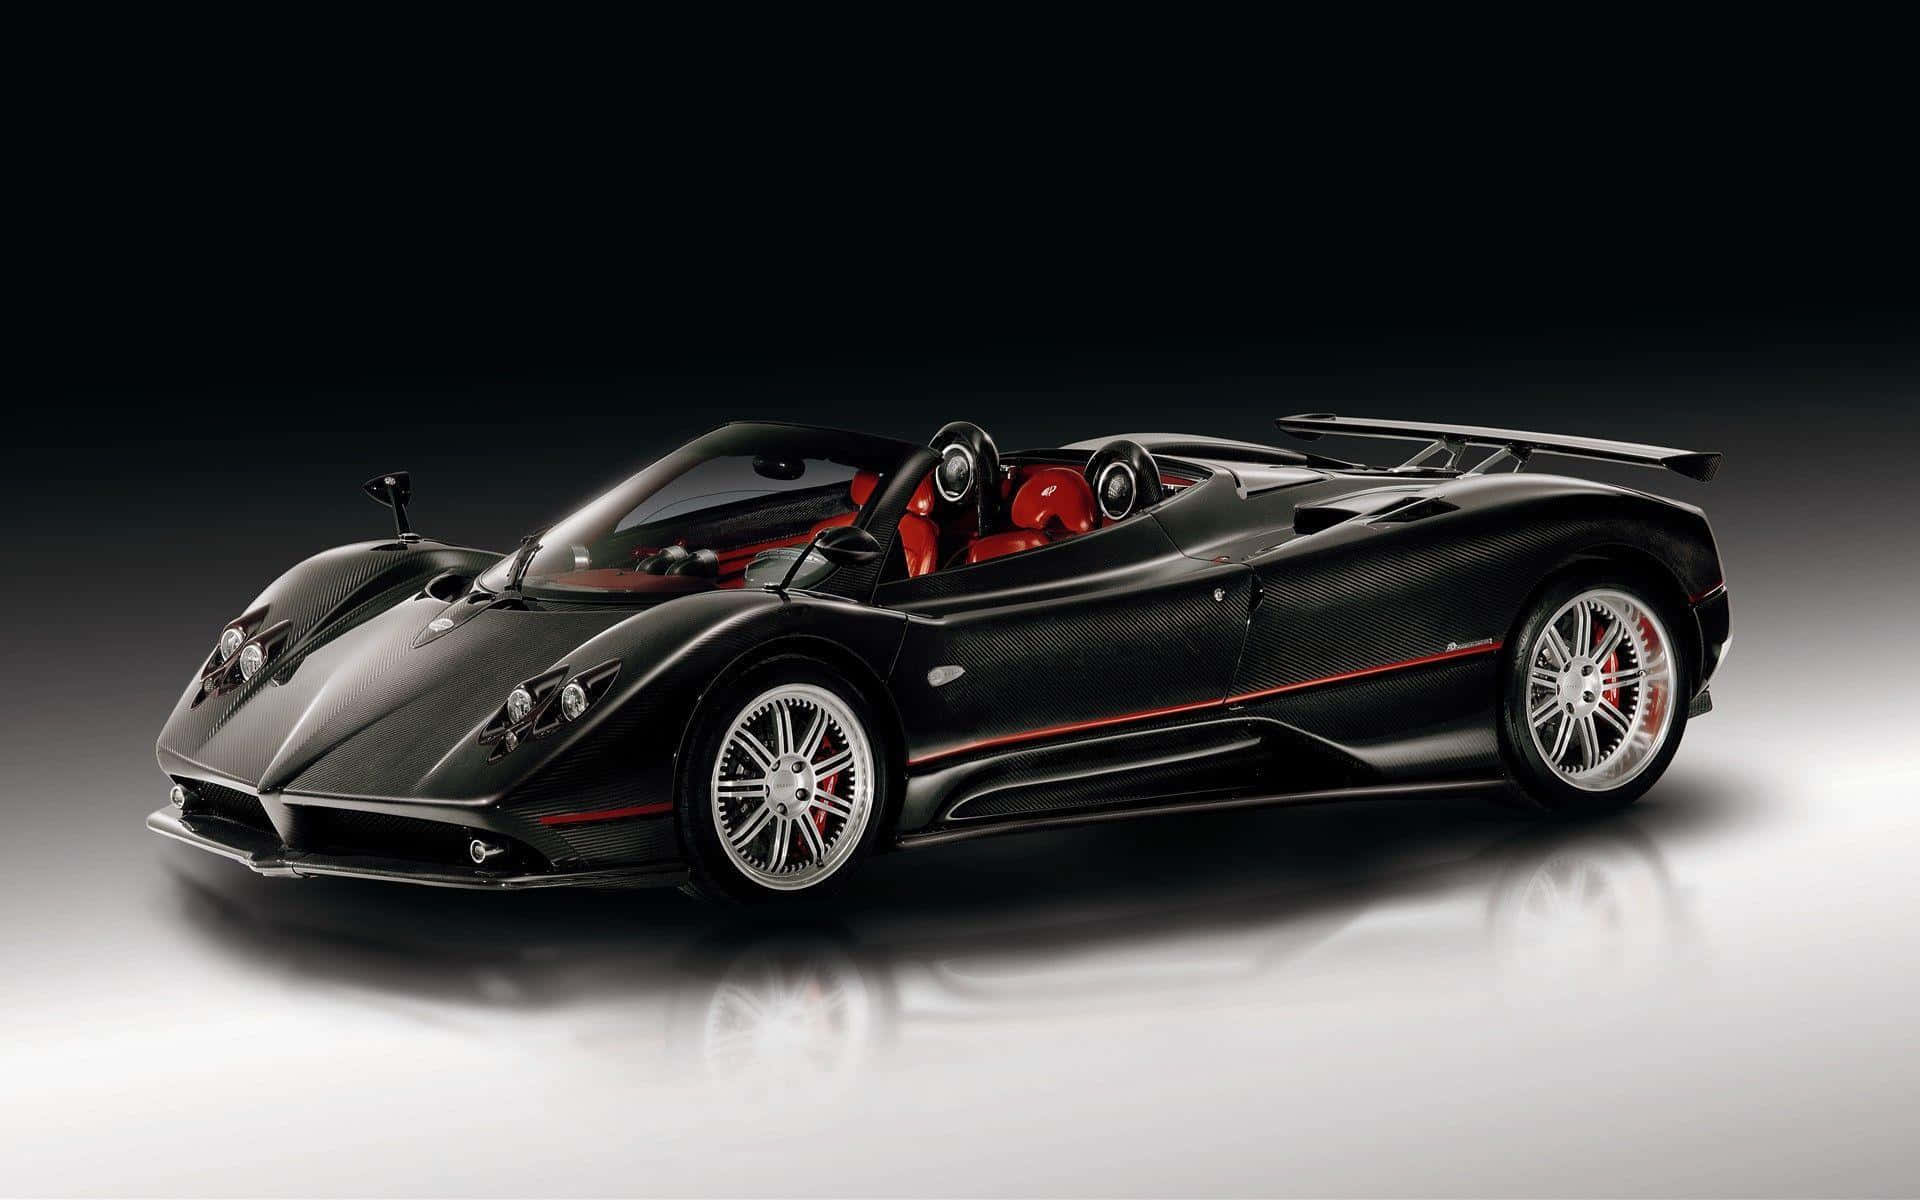 Caption: Pristine And Powerful - A Visual Spectacle Of A Sleek Pagani Zonda F. Wallpaper